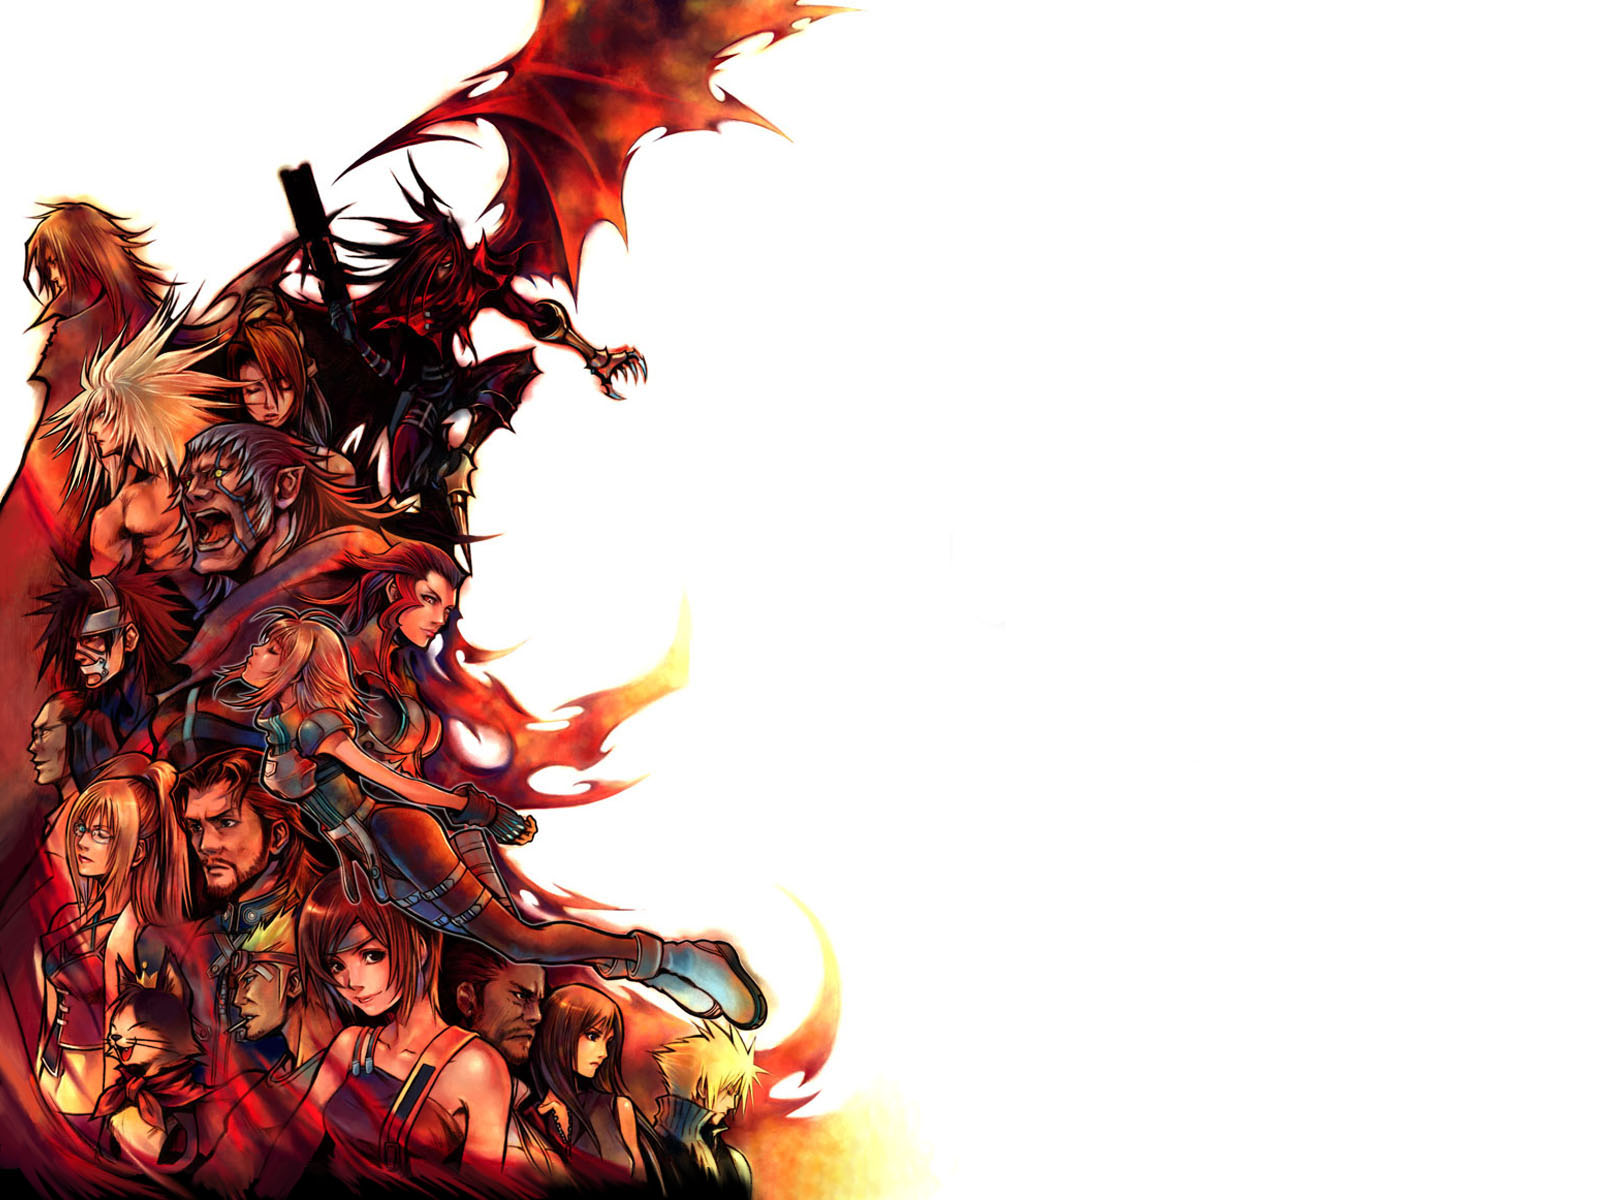 Final Fantasy 7 desktop wallpaper featuring the iconic characters and setting from the game.